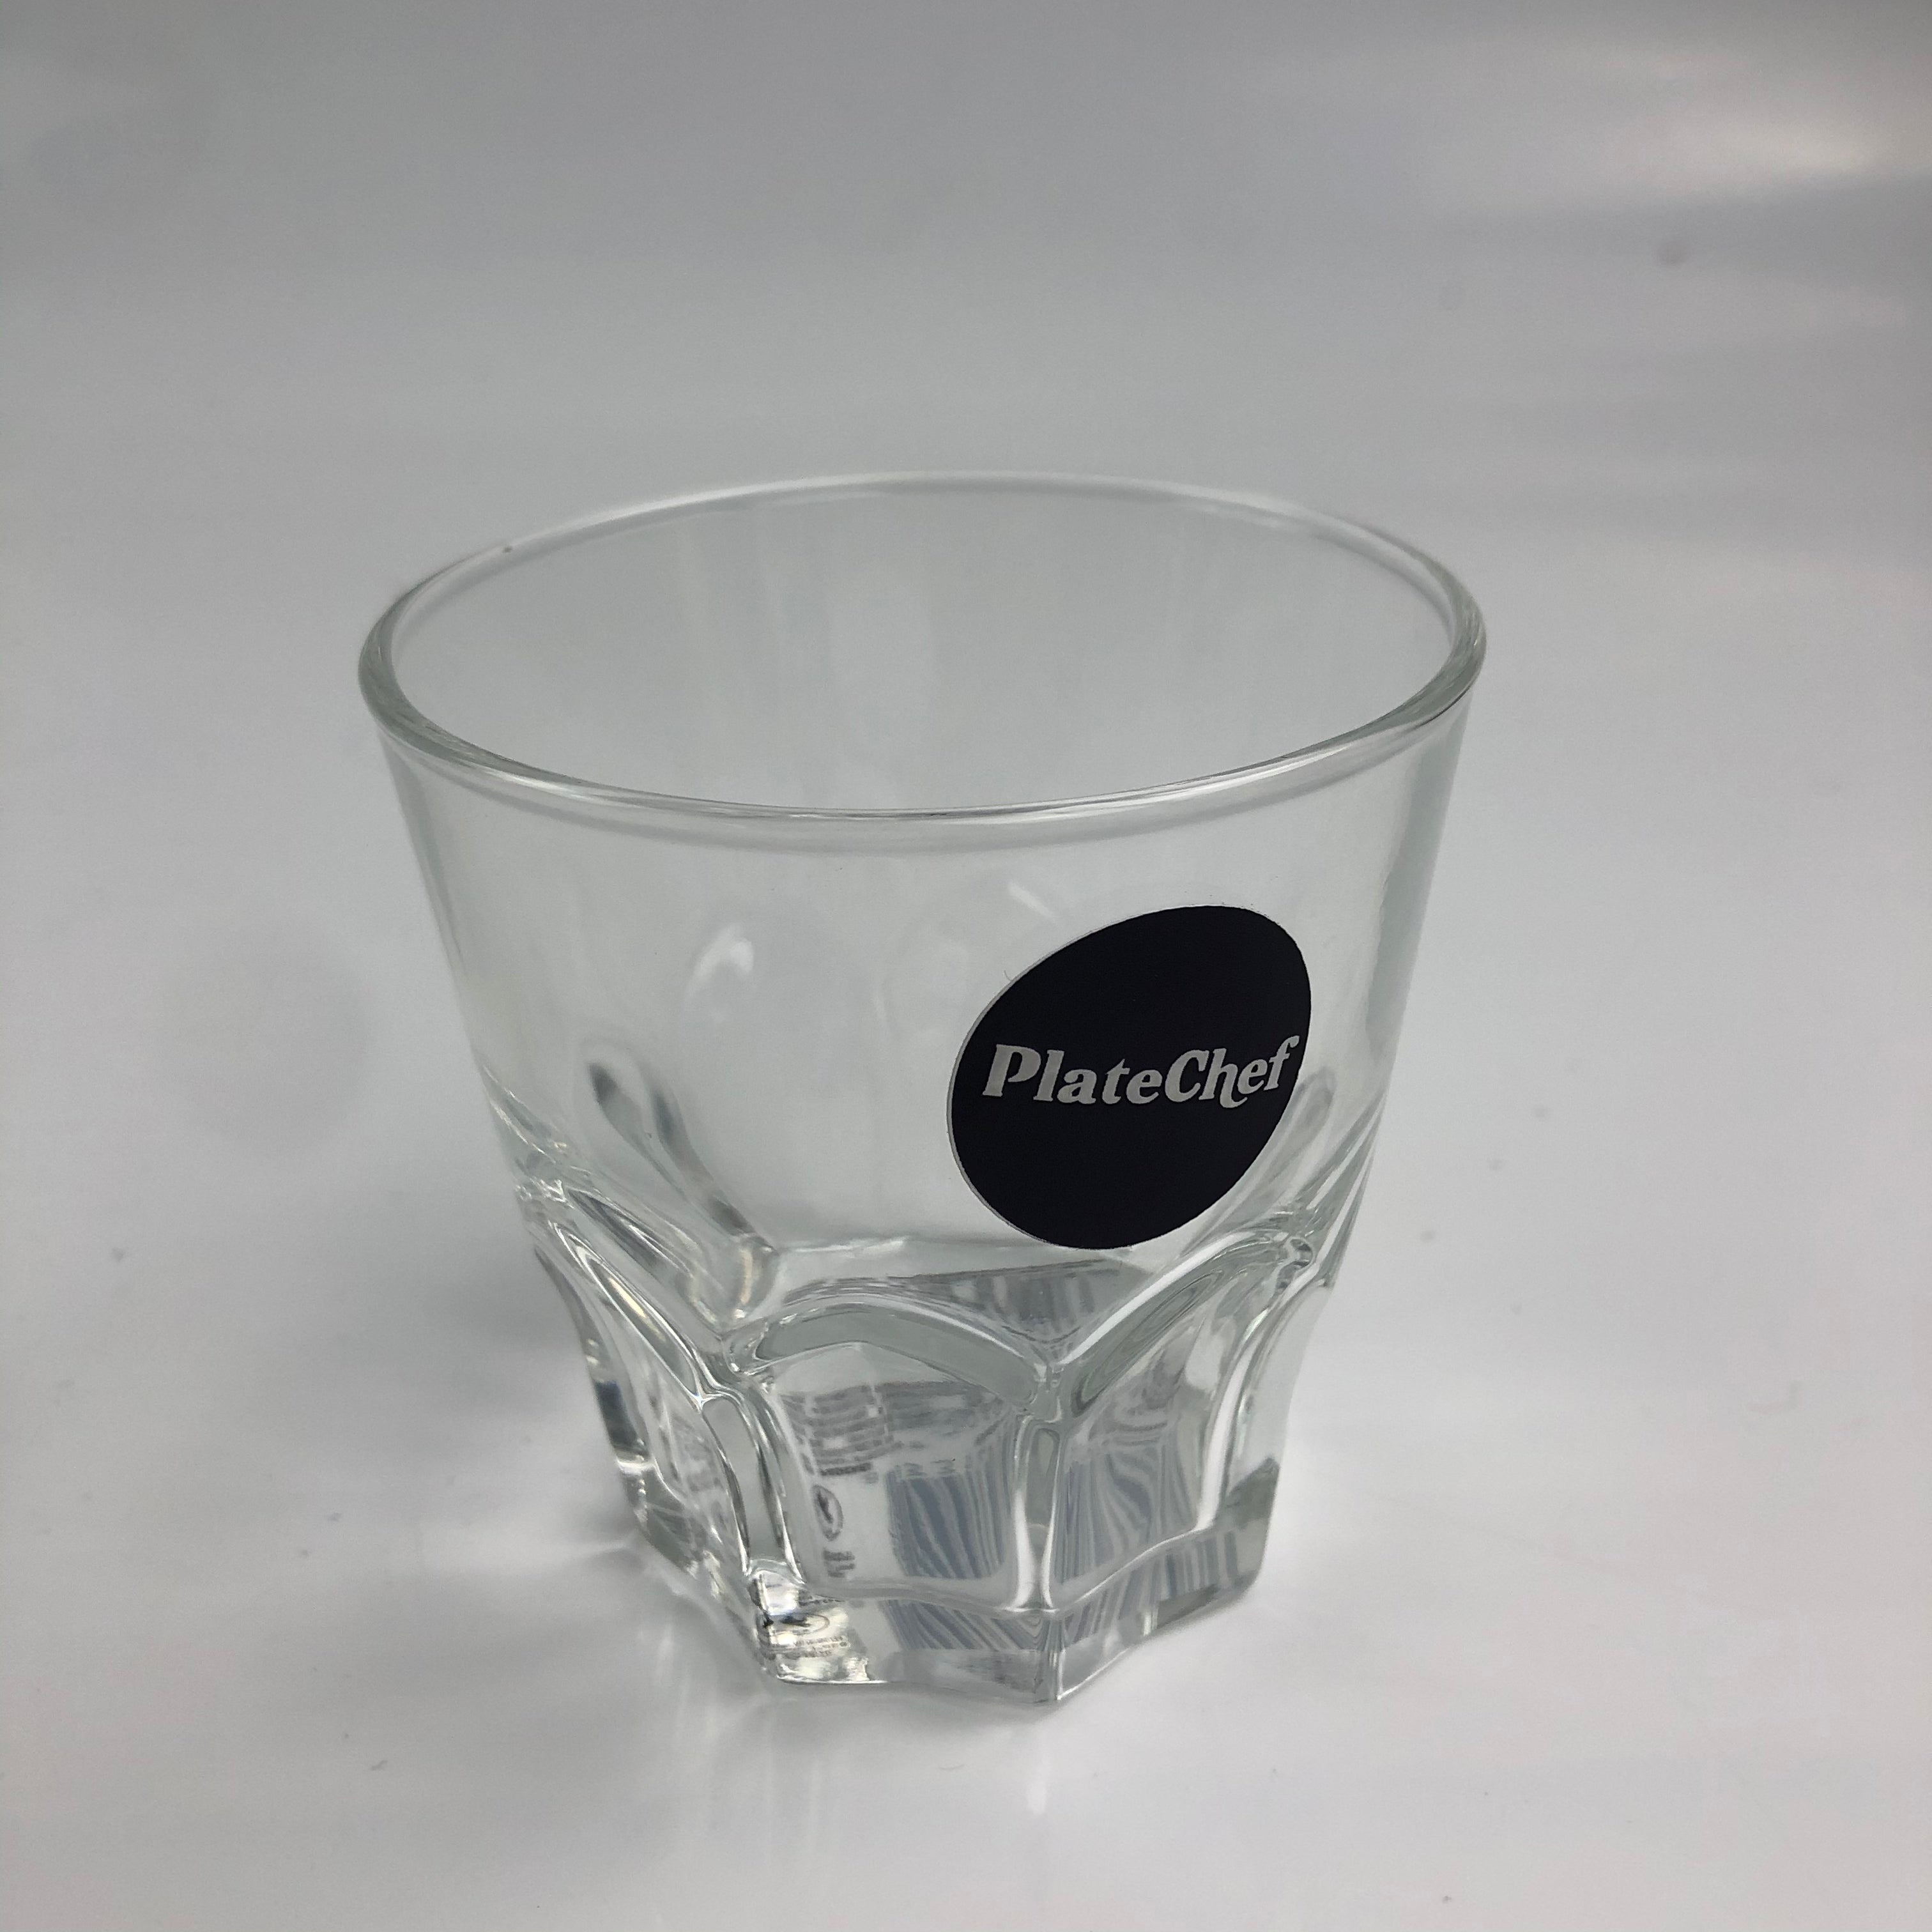 PlateChef Unbreakable Drinking Glasses - Glow Guards